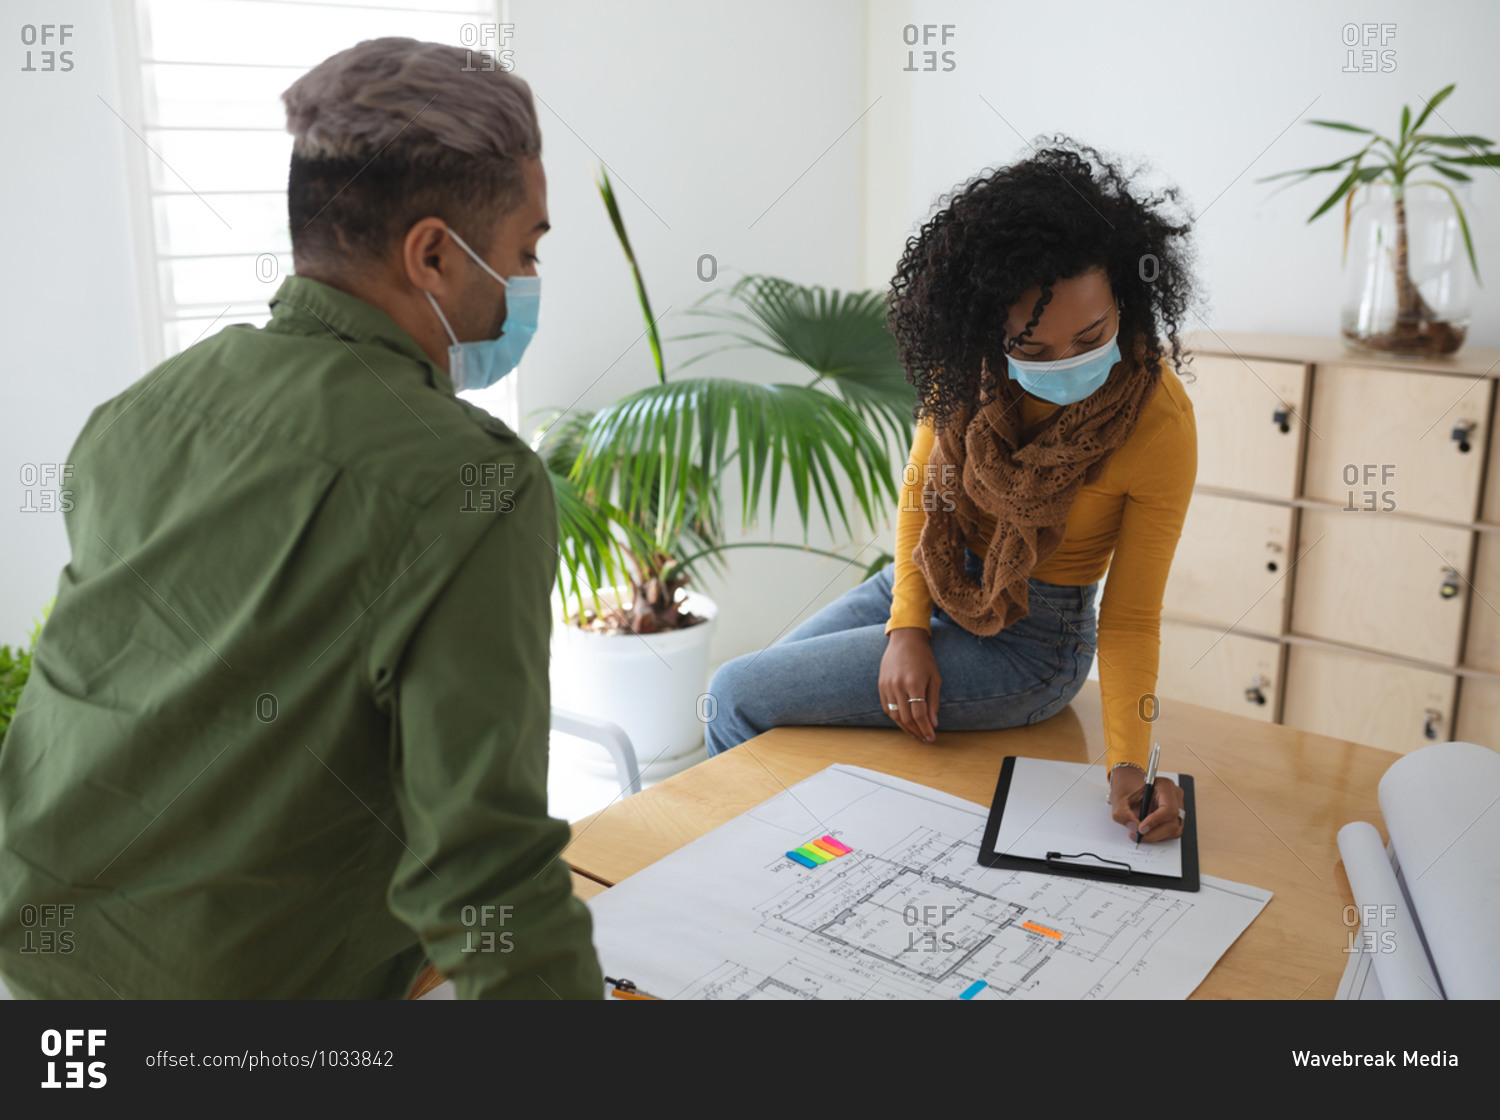 Mixed race male and female architects in office wearing face masks, discussing over architectural drawing. Health and hygiene in workplace during Coronavirus Covid 19 pandemic.